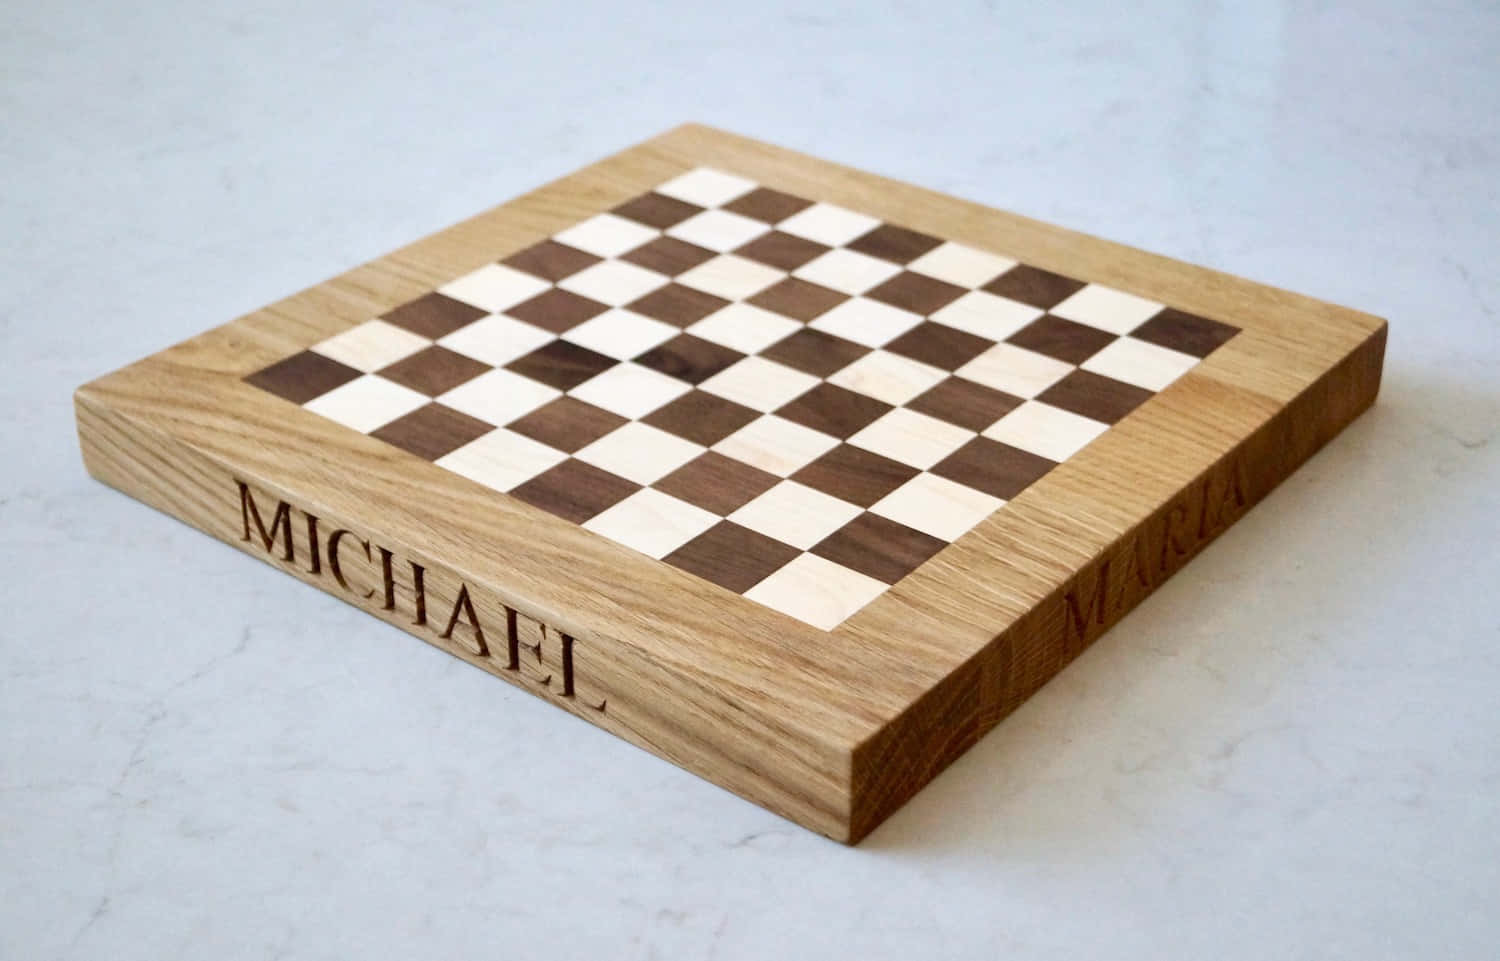 Move The Pieces And Outplay Your Opponent In A Game Of Strategy